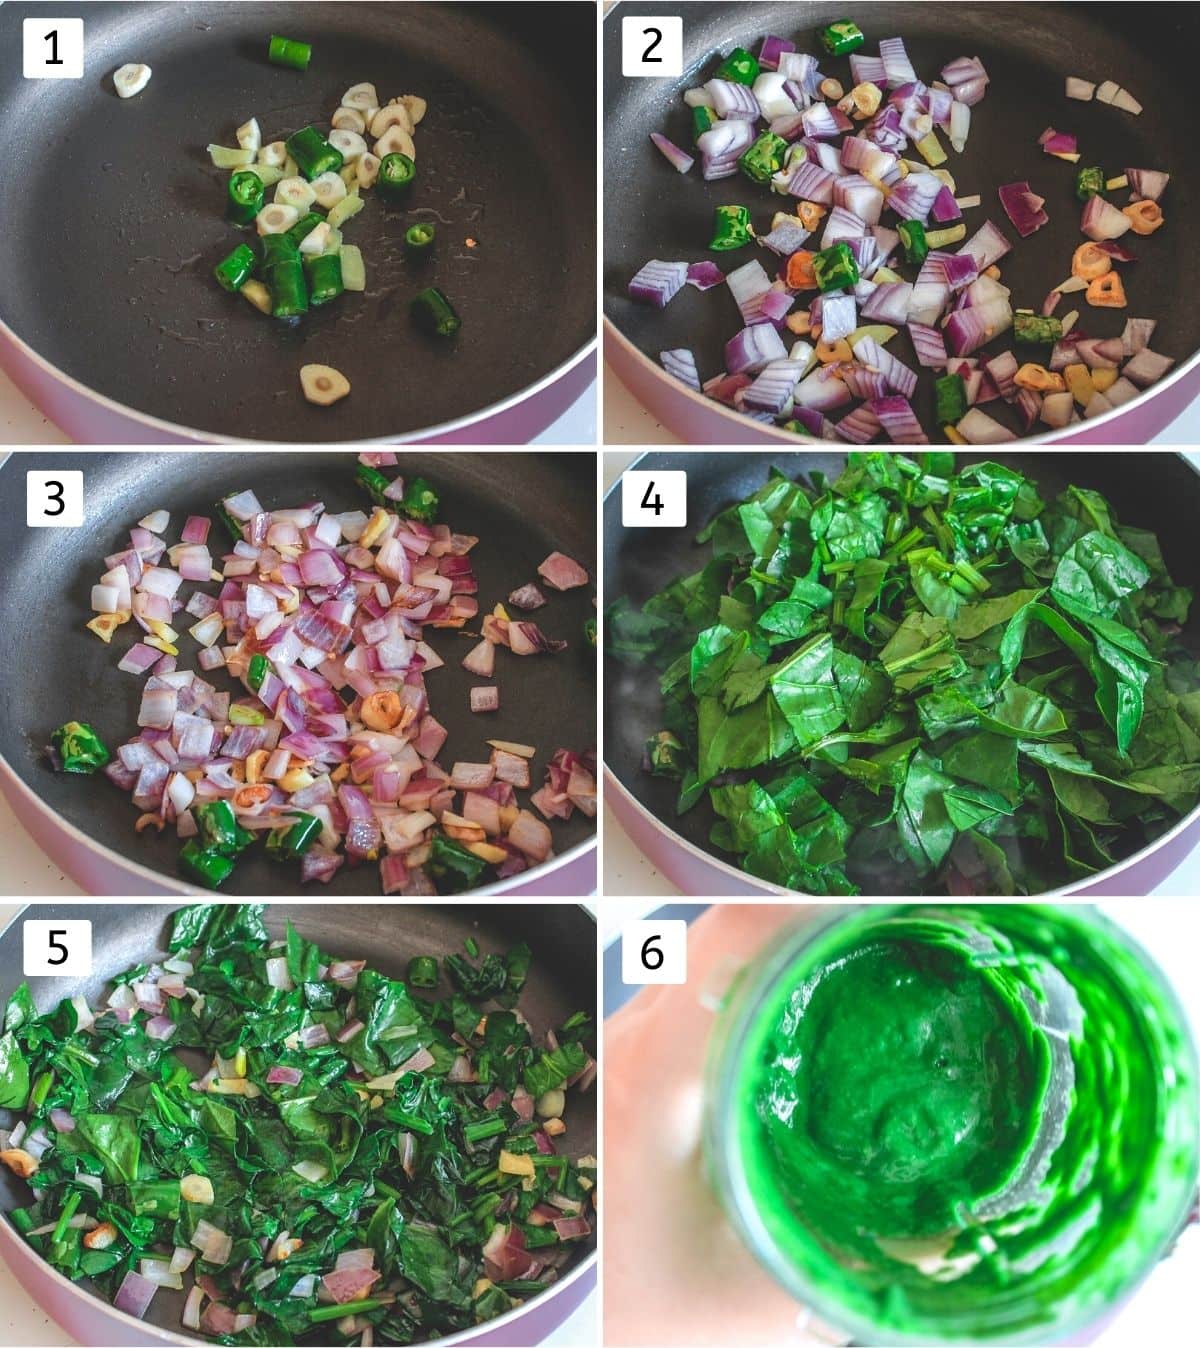 Collage of 6 images showing cooking onion, spinach and spinach paste.